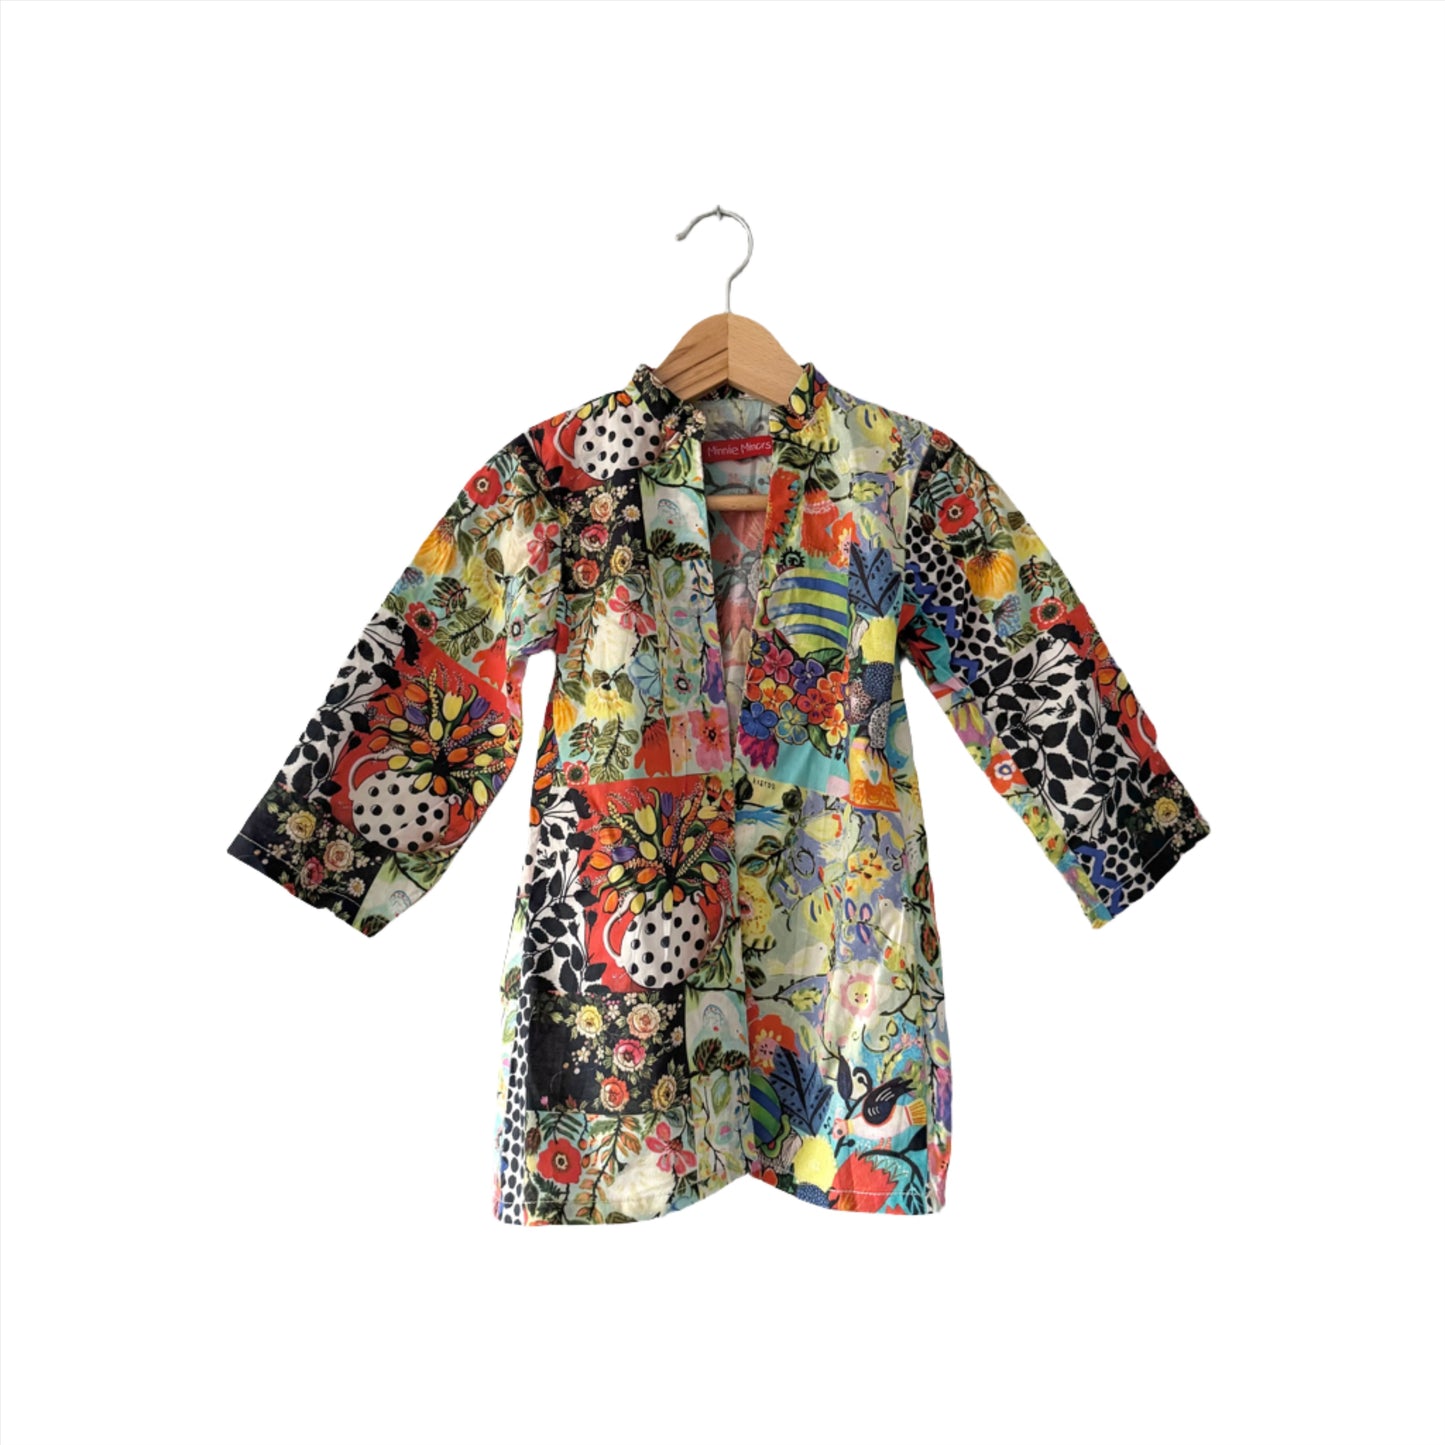 Minnie Minors / Colourful blouse / 12-18M